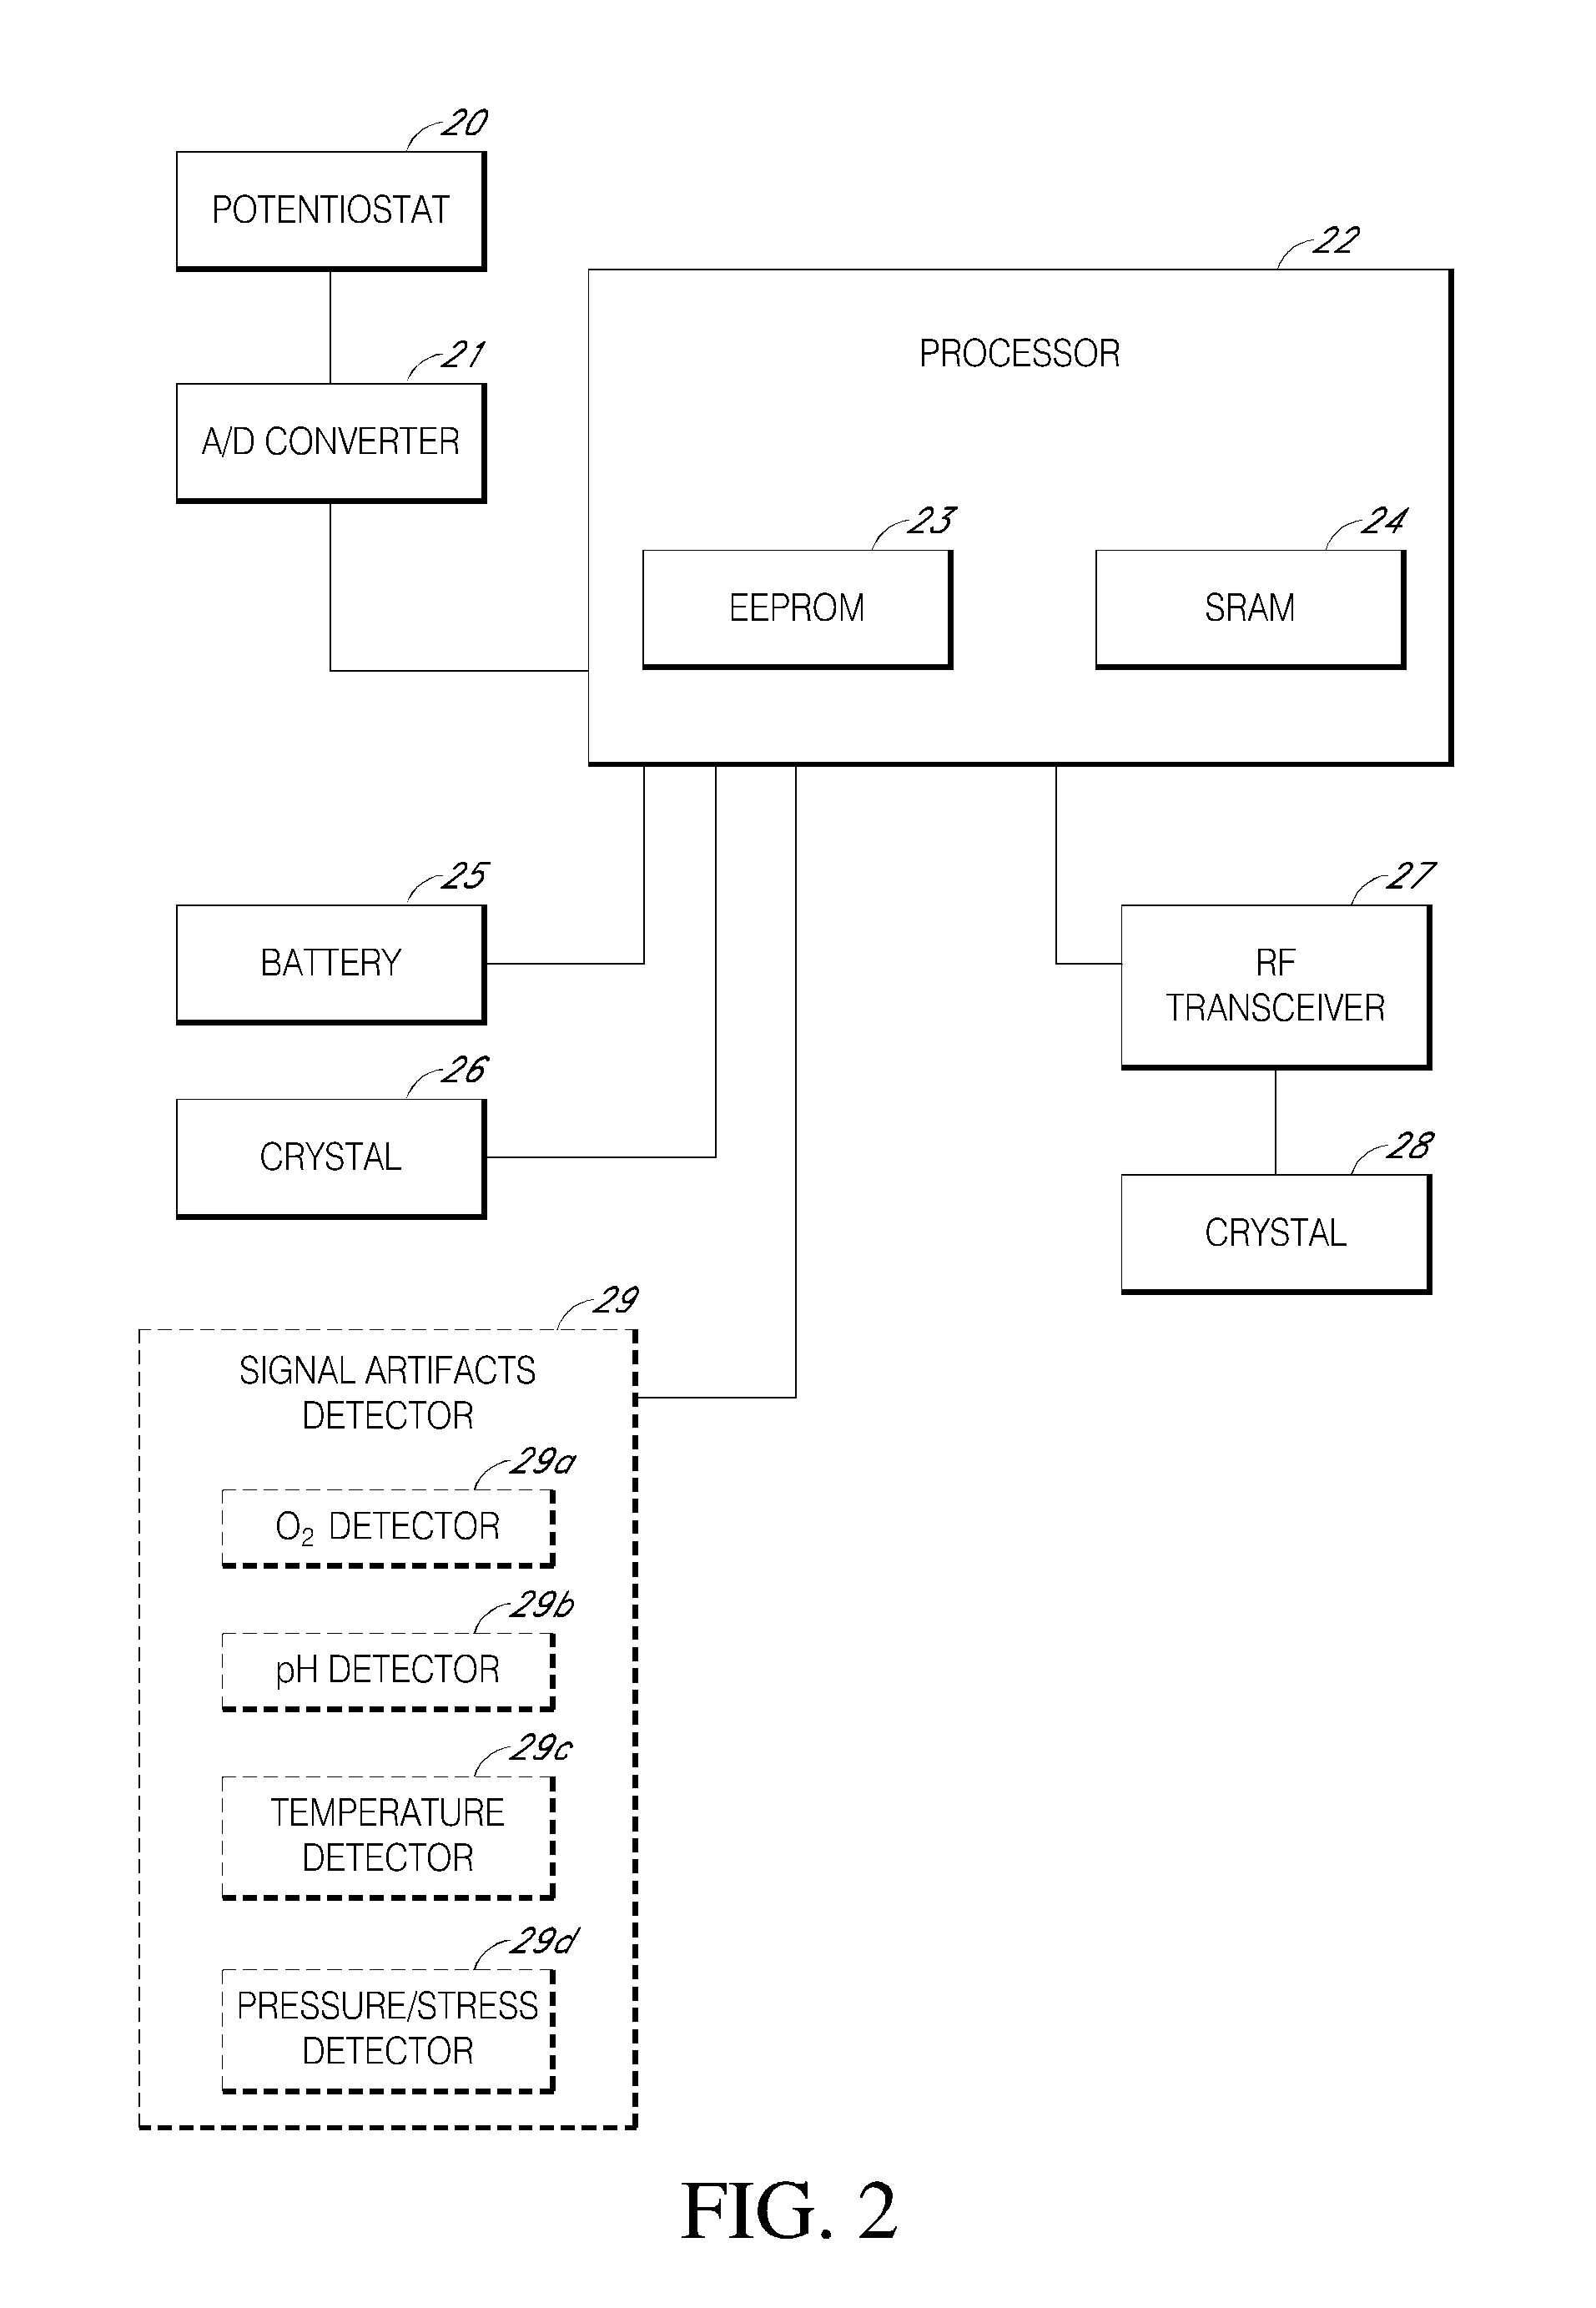 Systems and methods for replacing signal artifacts in a glucose sensor data stream